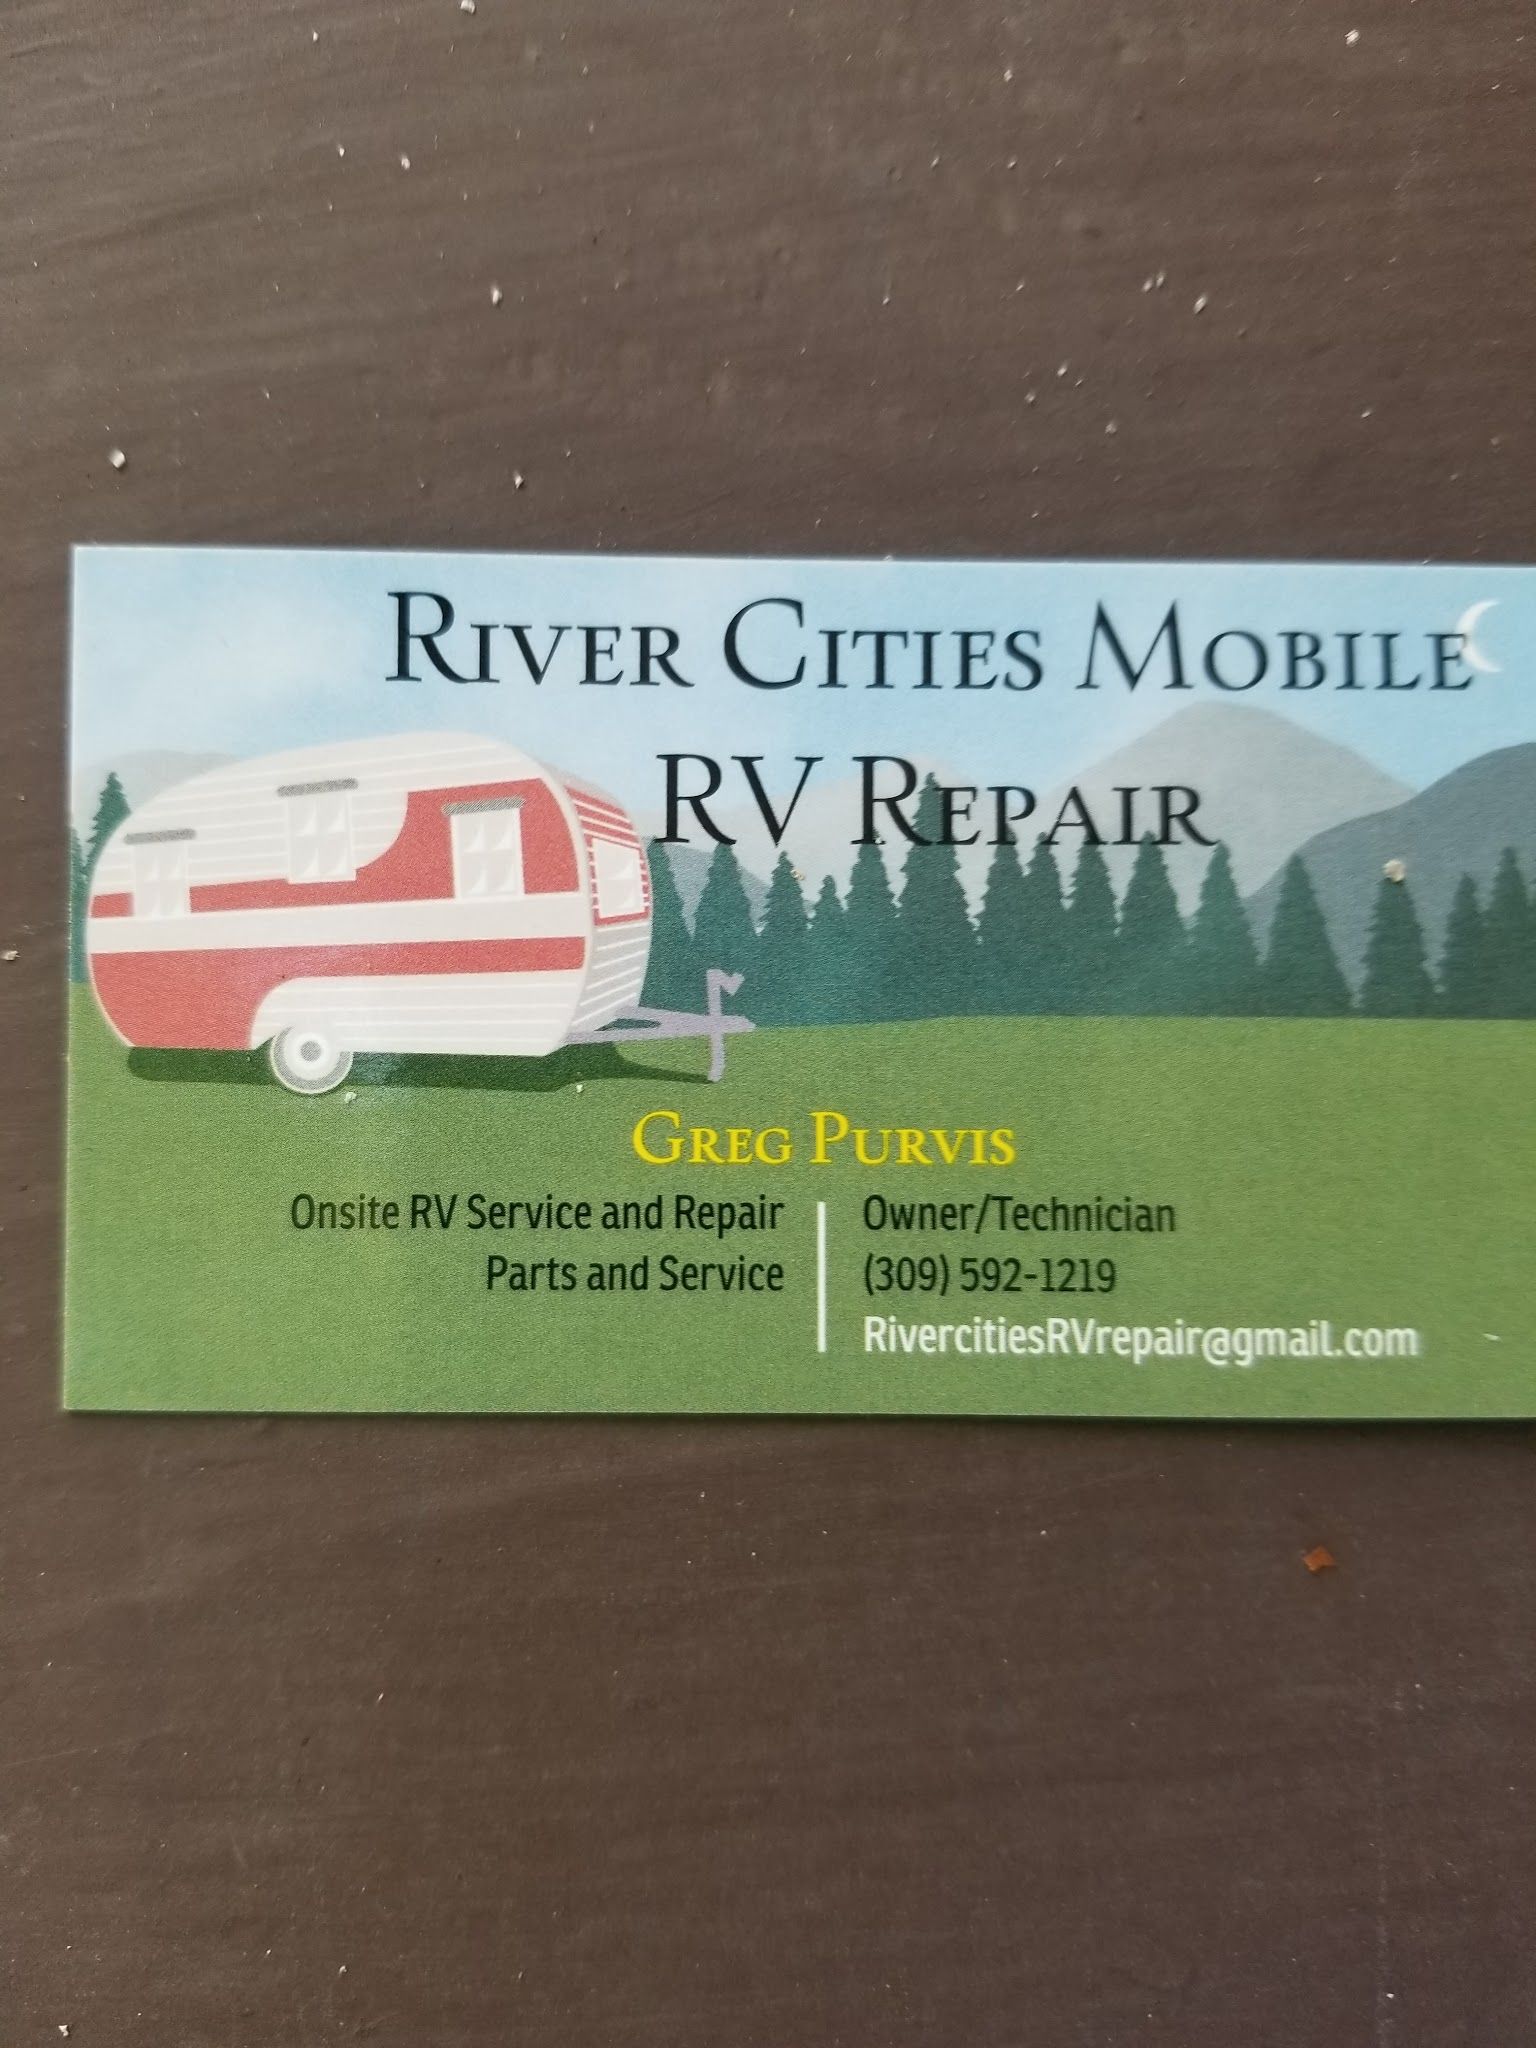 Services & Products River Cities Mobile RV Repair LLC in East Moline IL